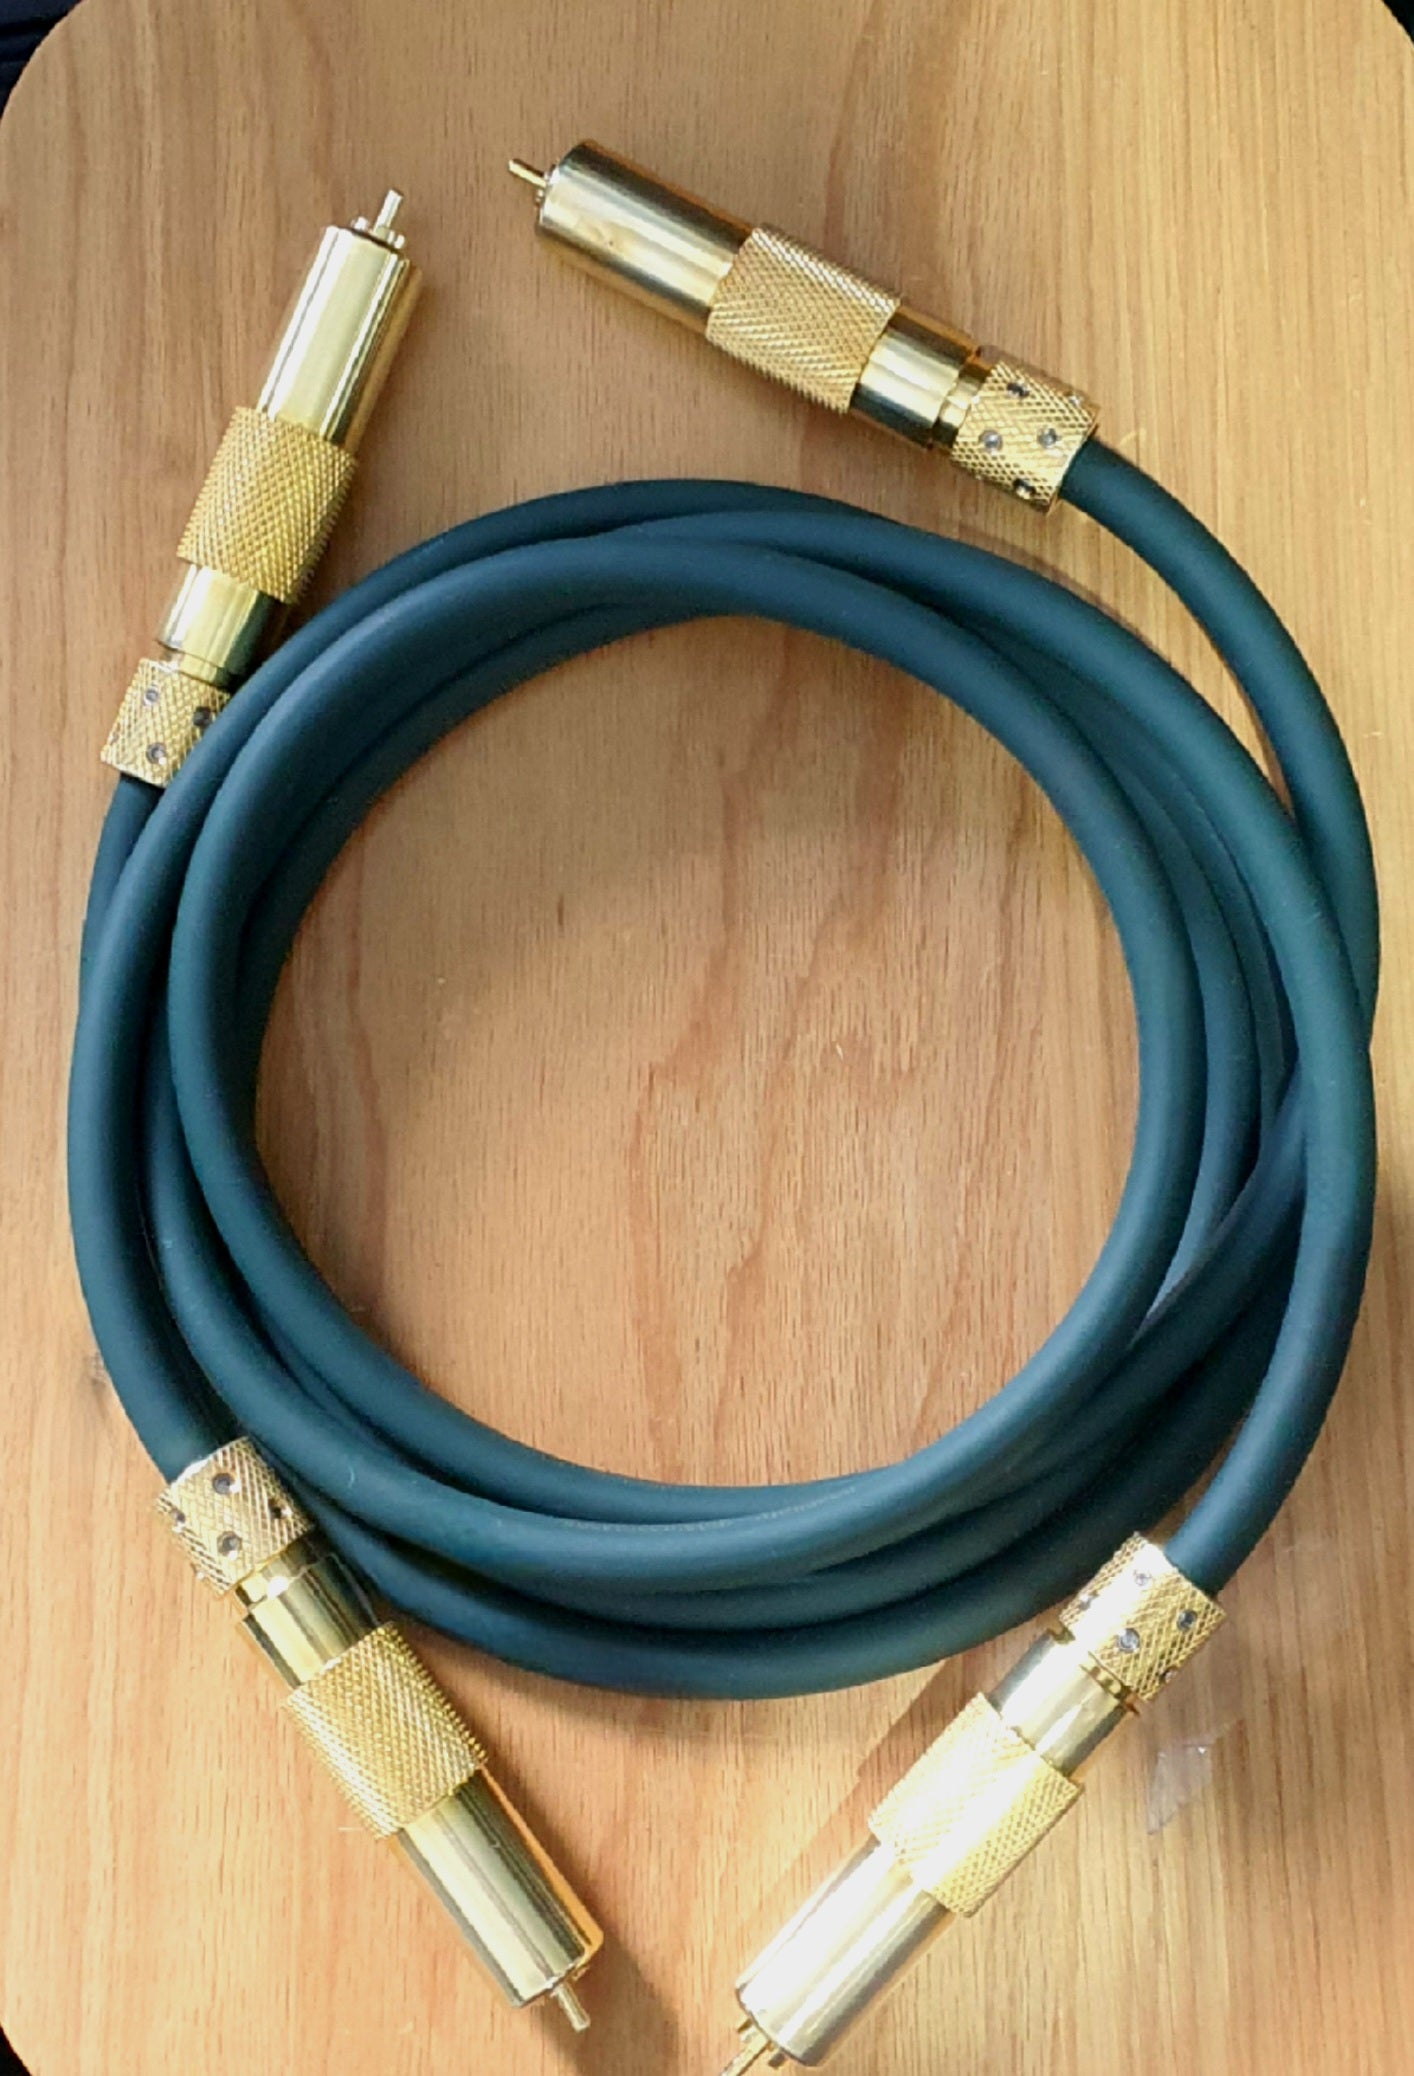 Monsoon pure silver RCA Interconnect Cables 